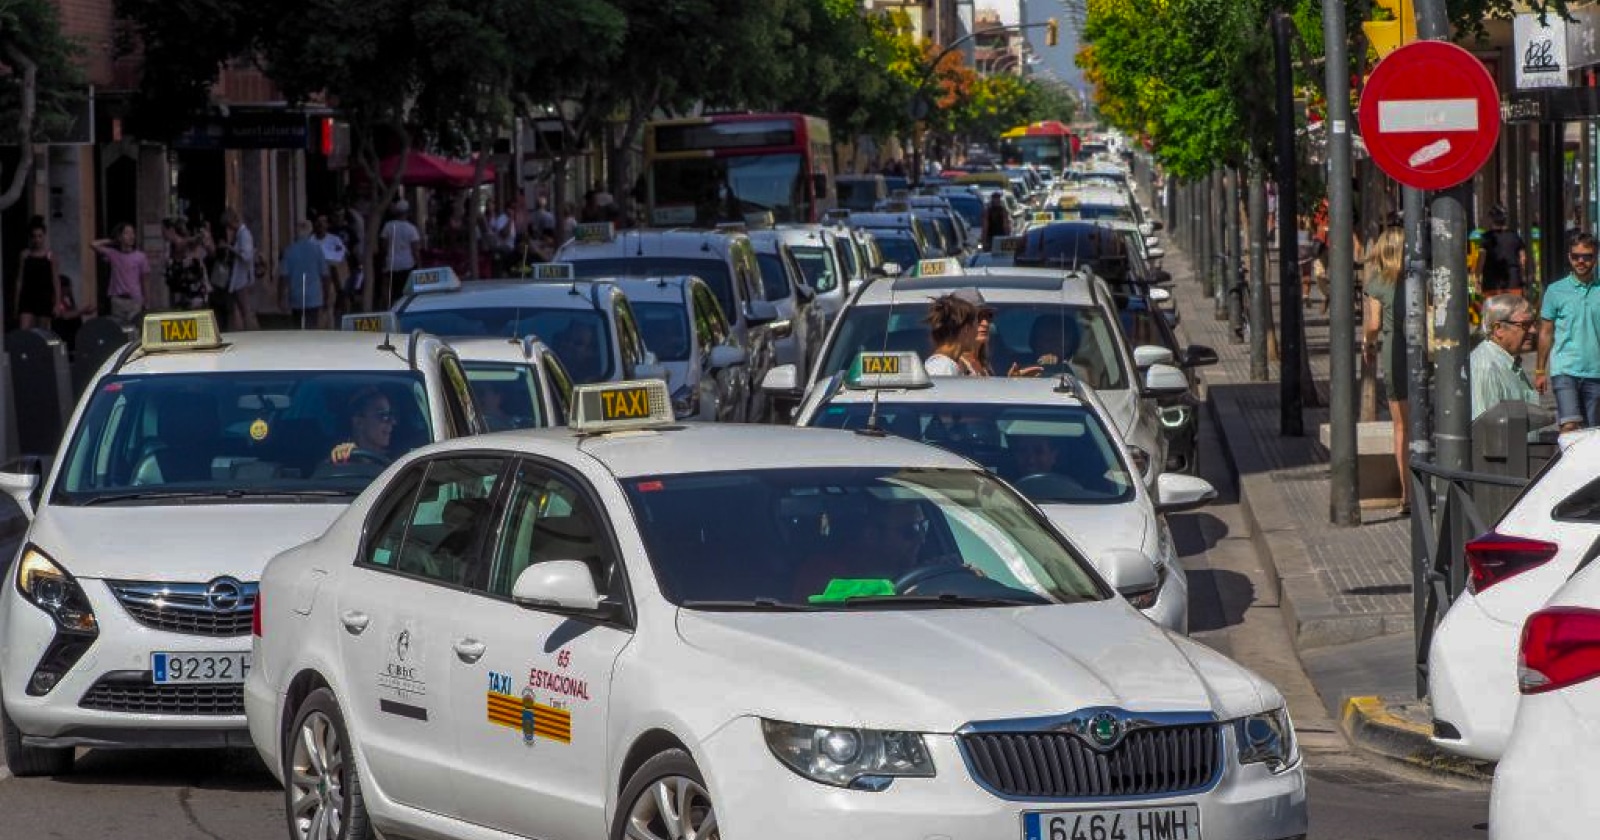 Uber in Ibiza? The Next Best Thing 10